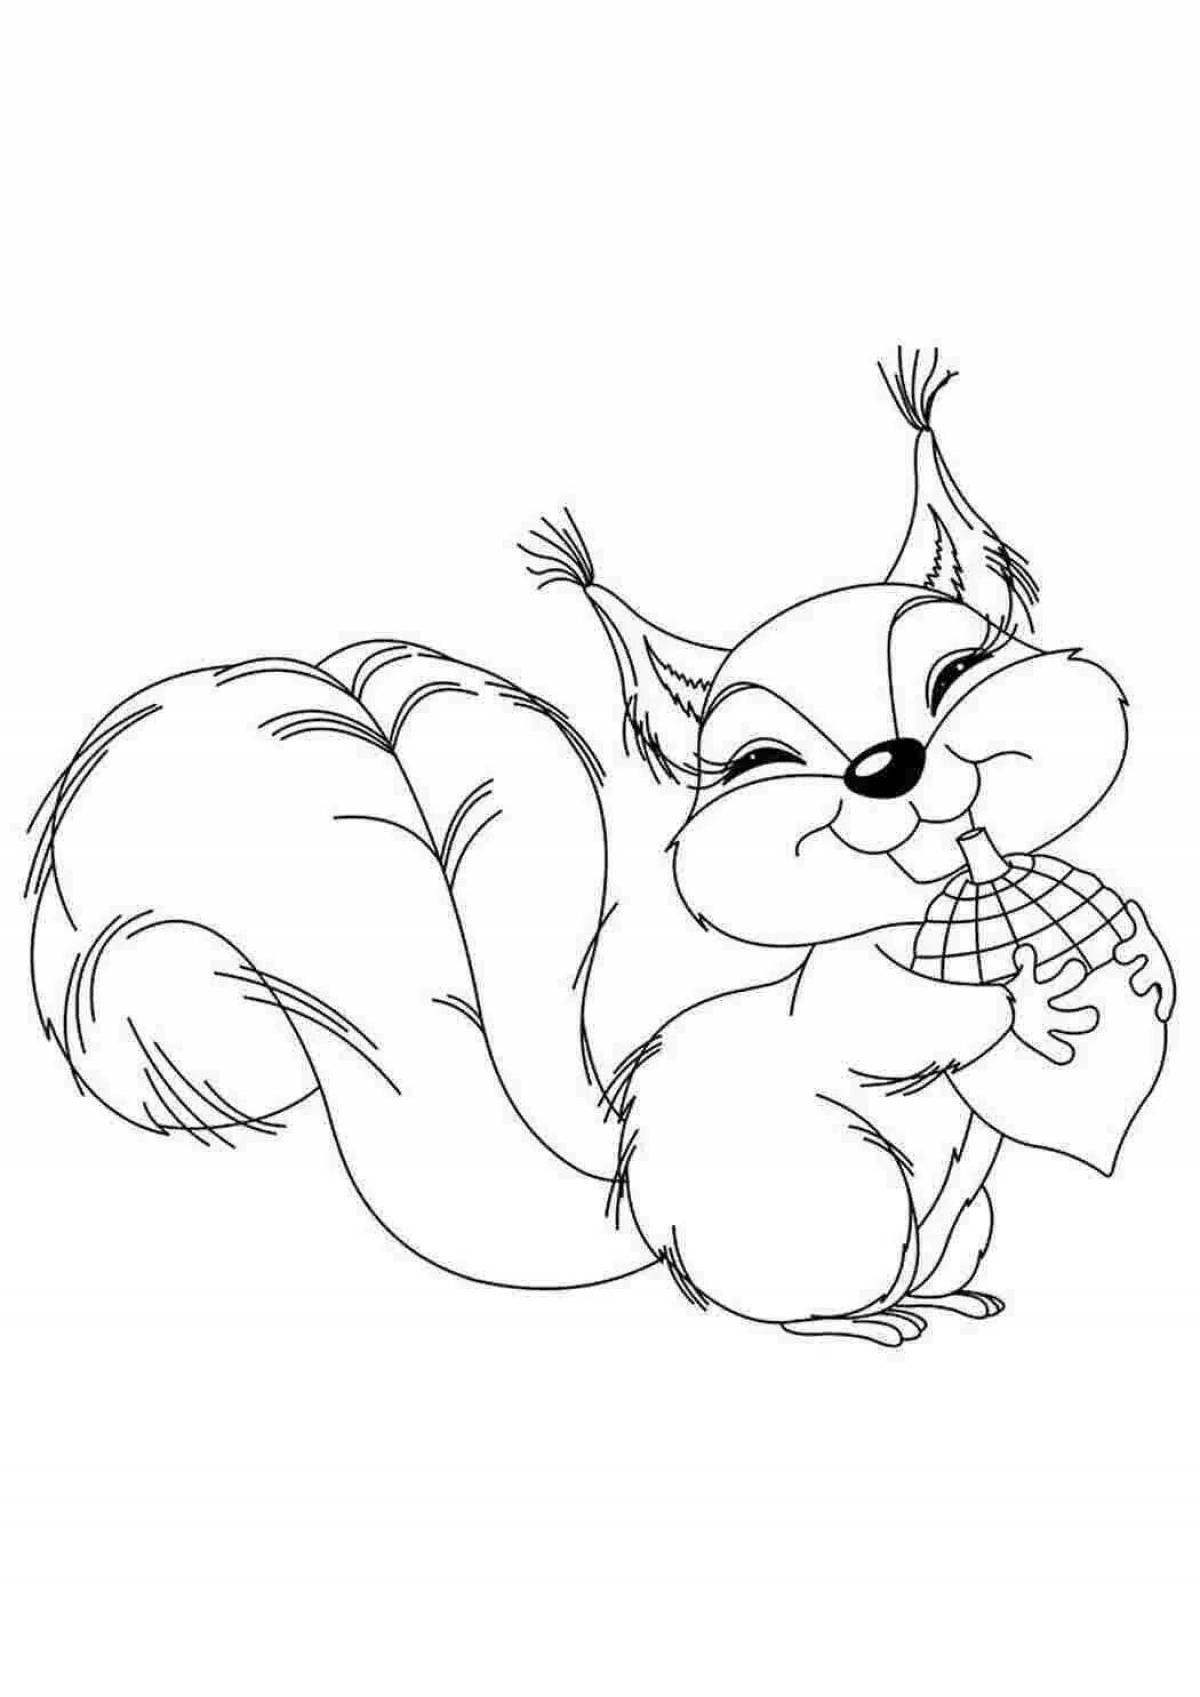 Playful drawing of a squirrel